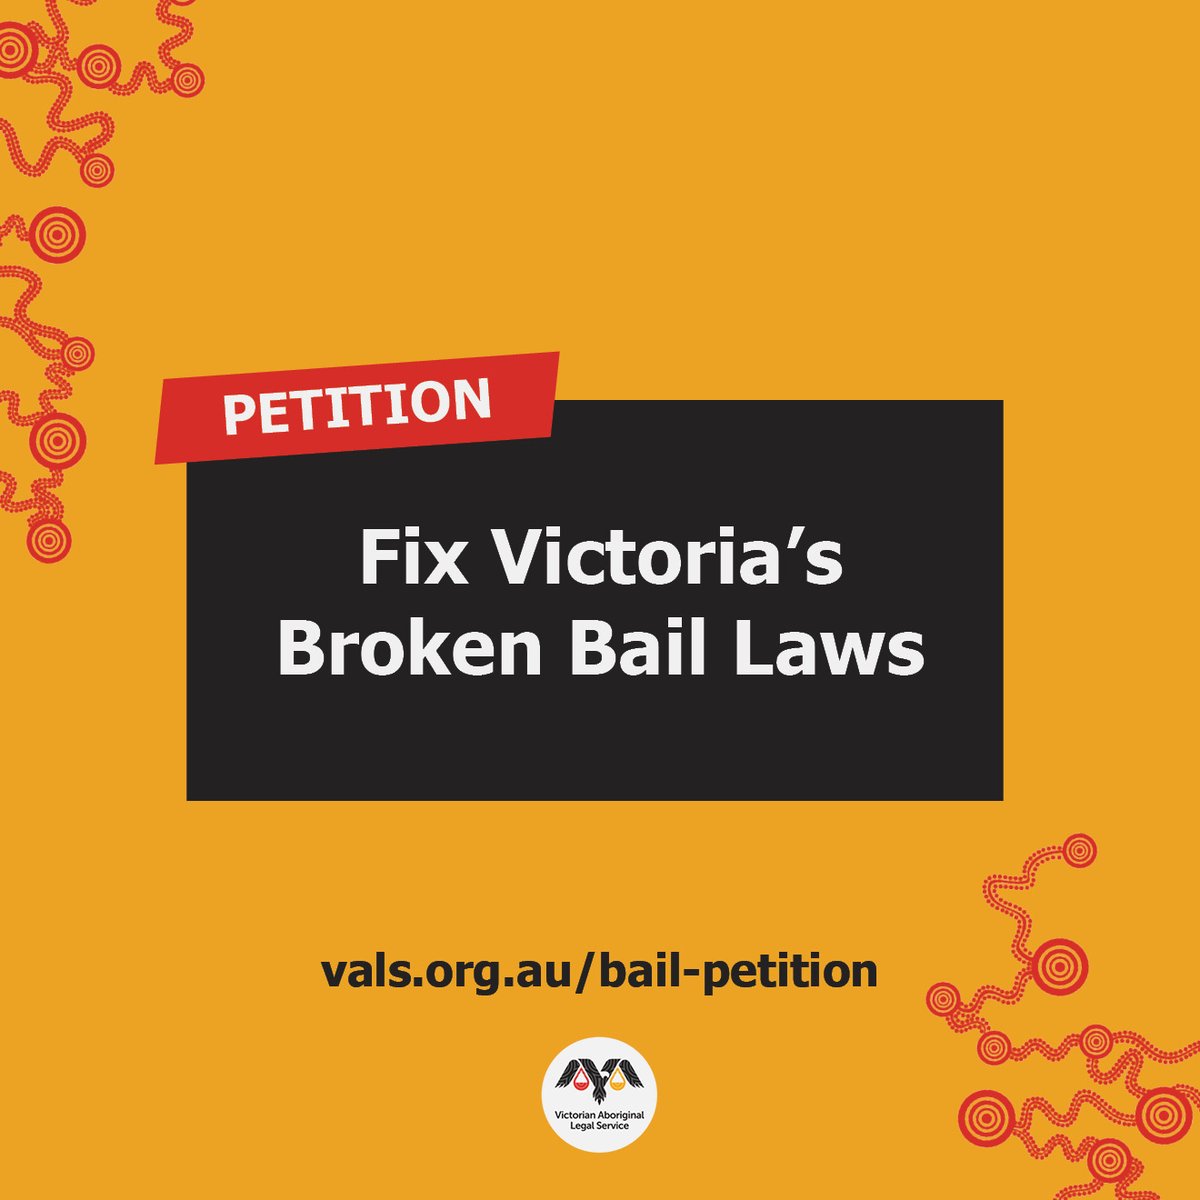 Help us get to 2000 signatures on our petition to fix Victoria's broken bail laws – 129 signatures to go

It would be great to get there before the end of #NAIDOCWeek 

#NAIDOC2022 #springst